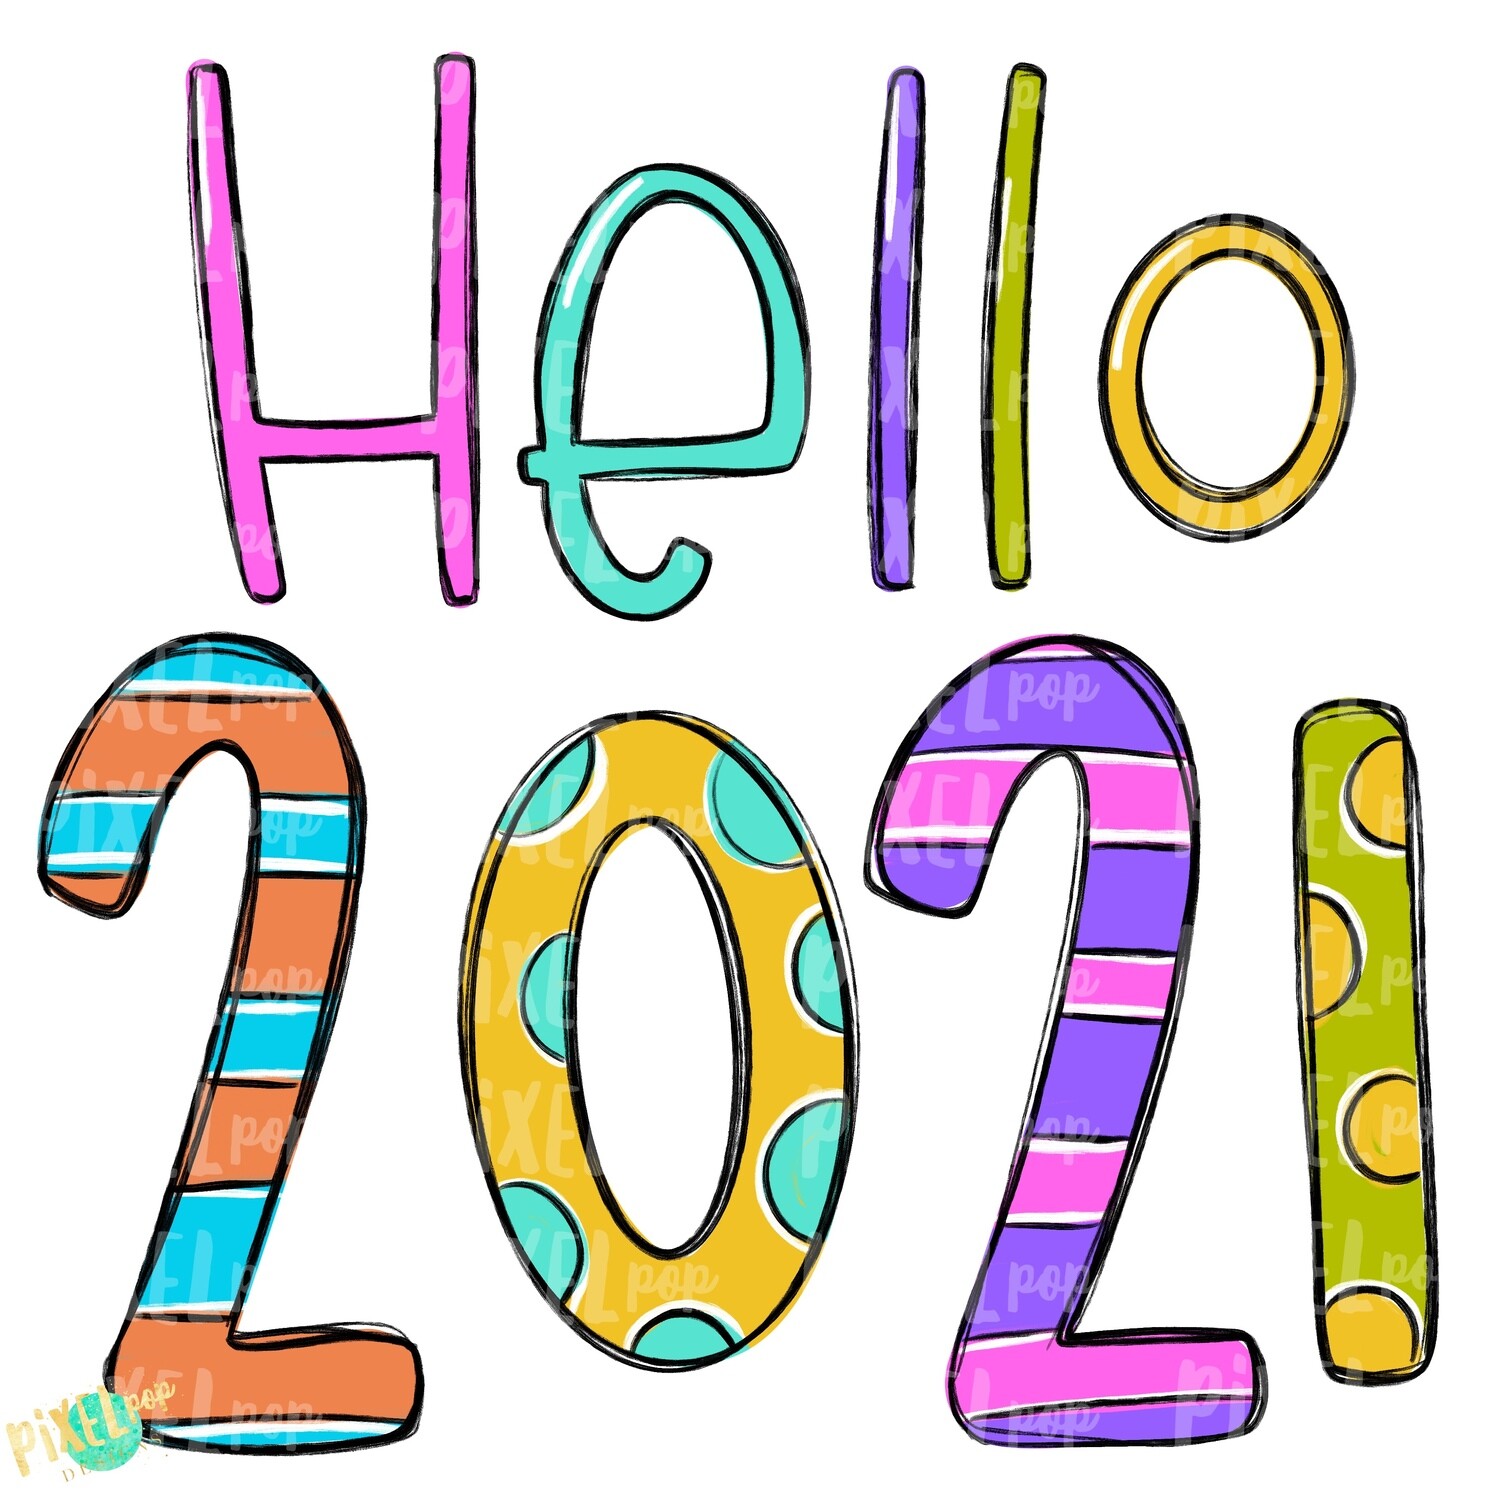 Hello 2021 Bright PNG | Happy New Year Art | New Years | 2021 | New Year Digital | Hand Drawn Design | Sublimation PNG | Digital Download |